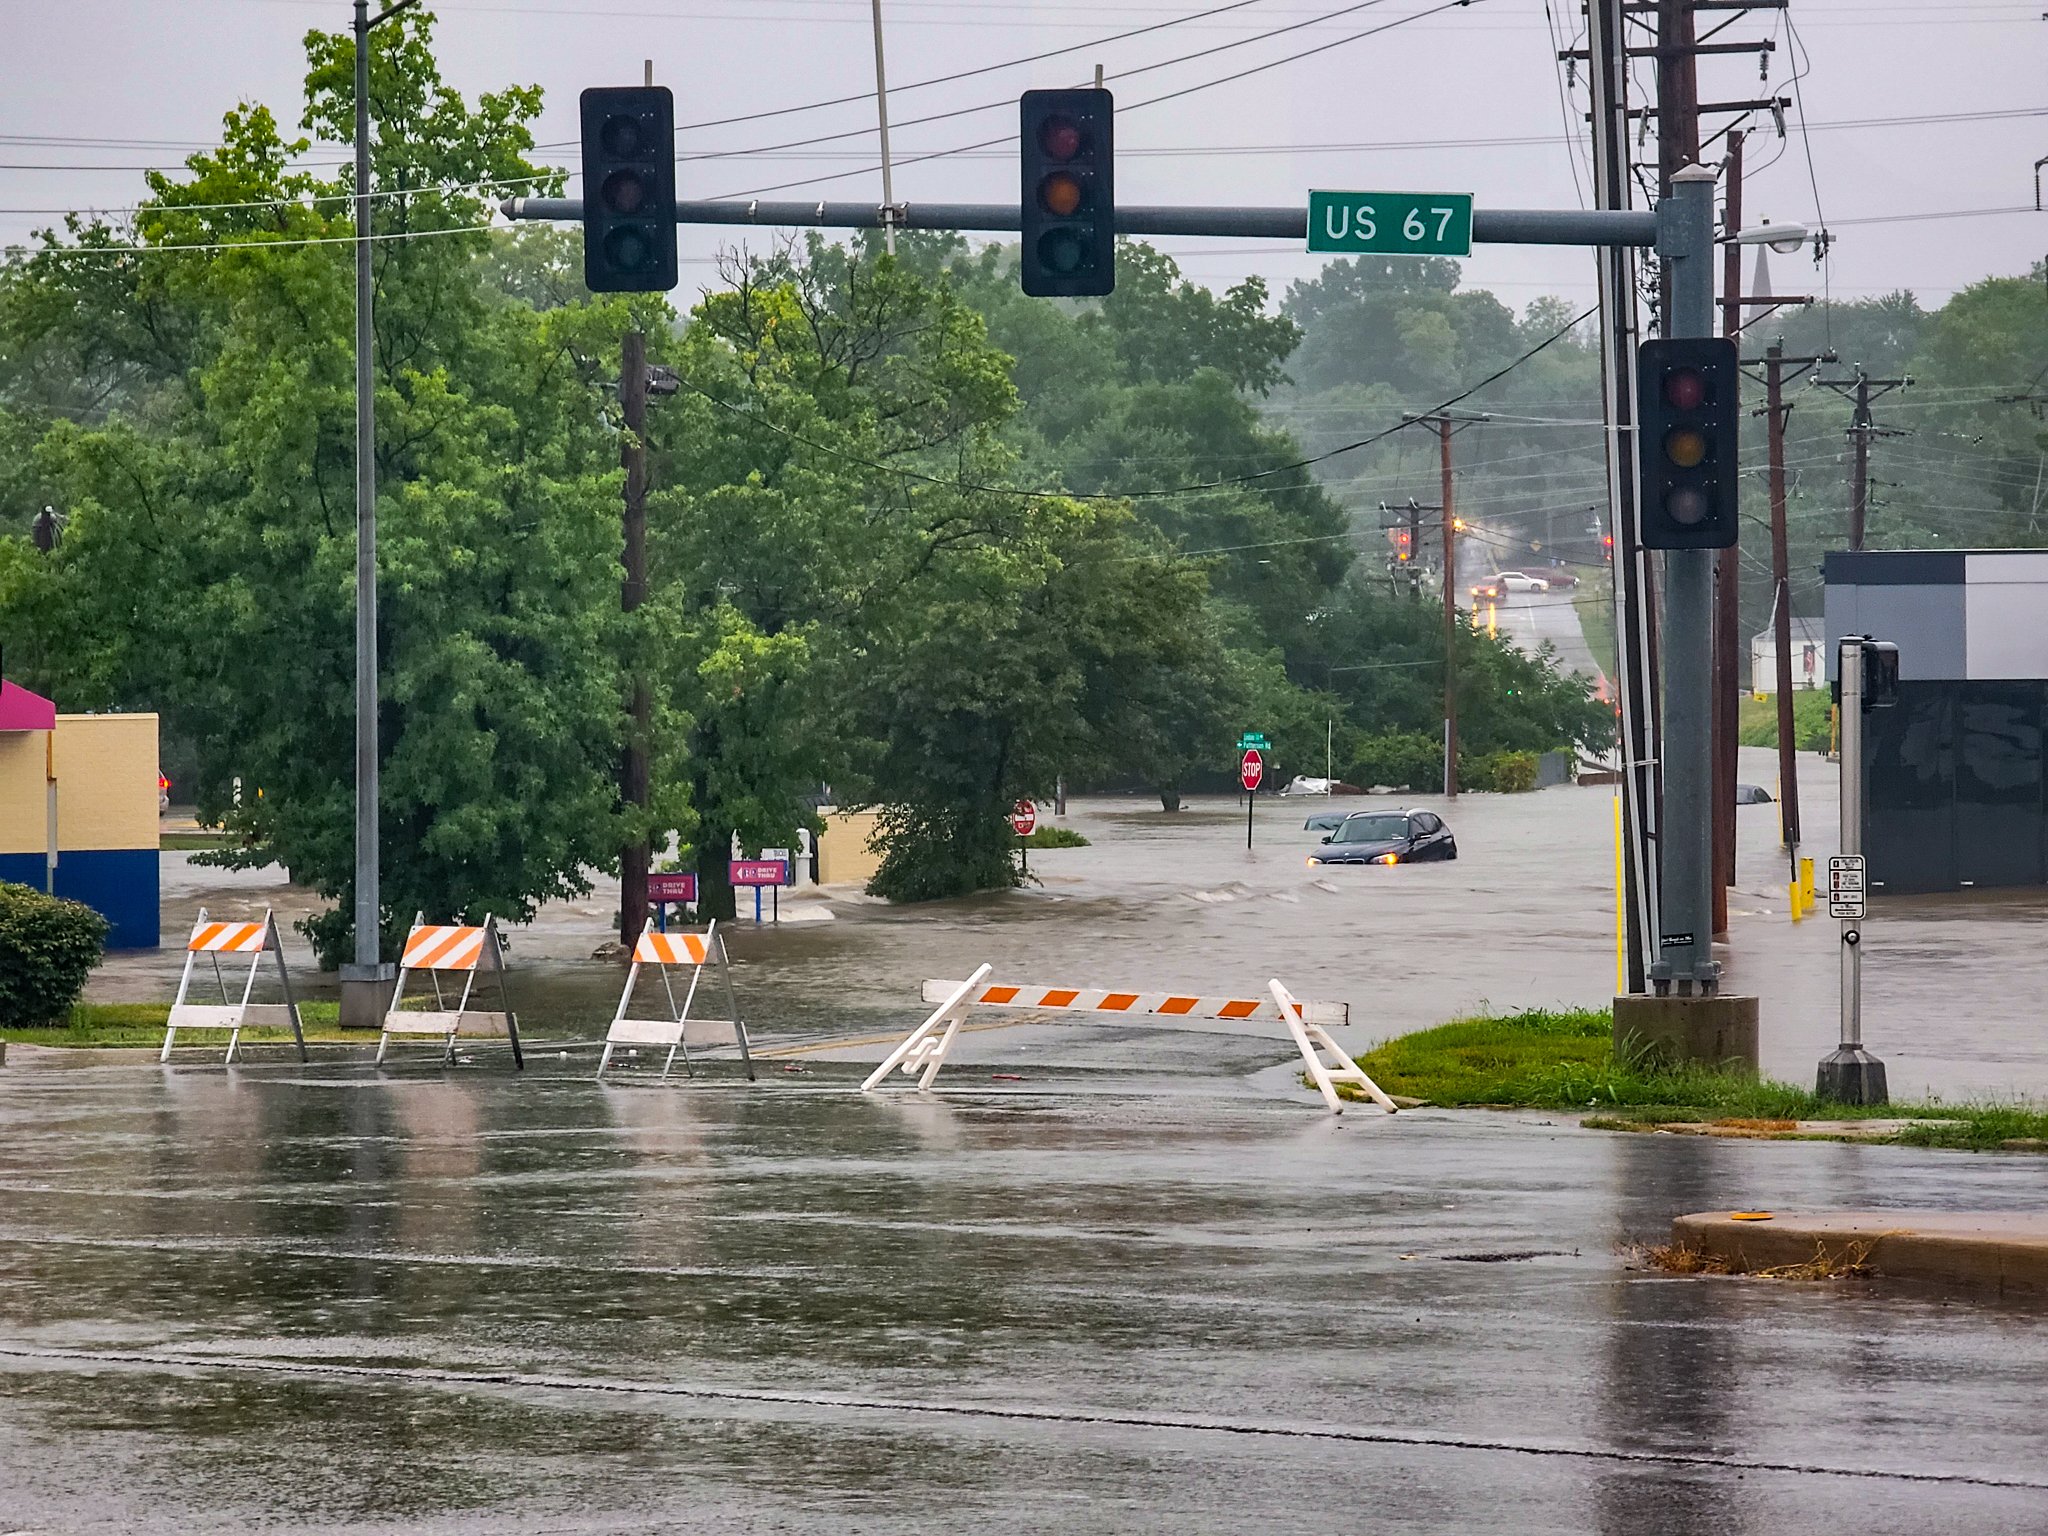 Flooding at Lindbergh Blvd. and St. Denis St. in Florissant, MO